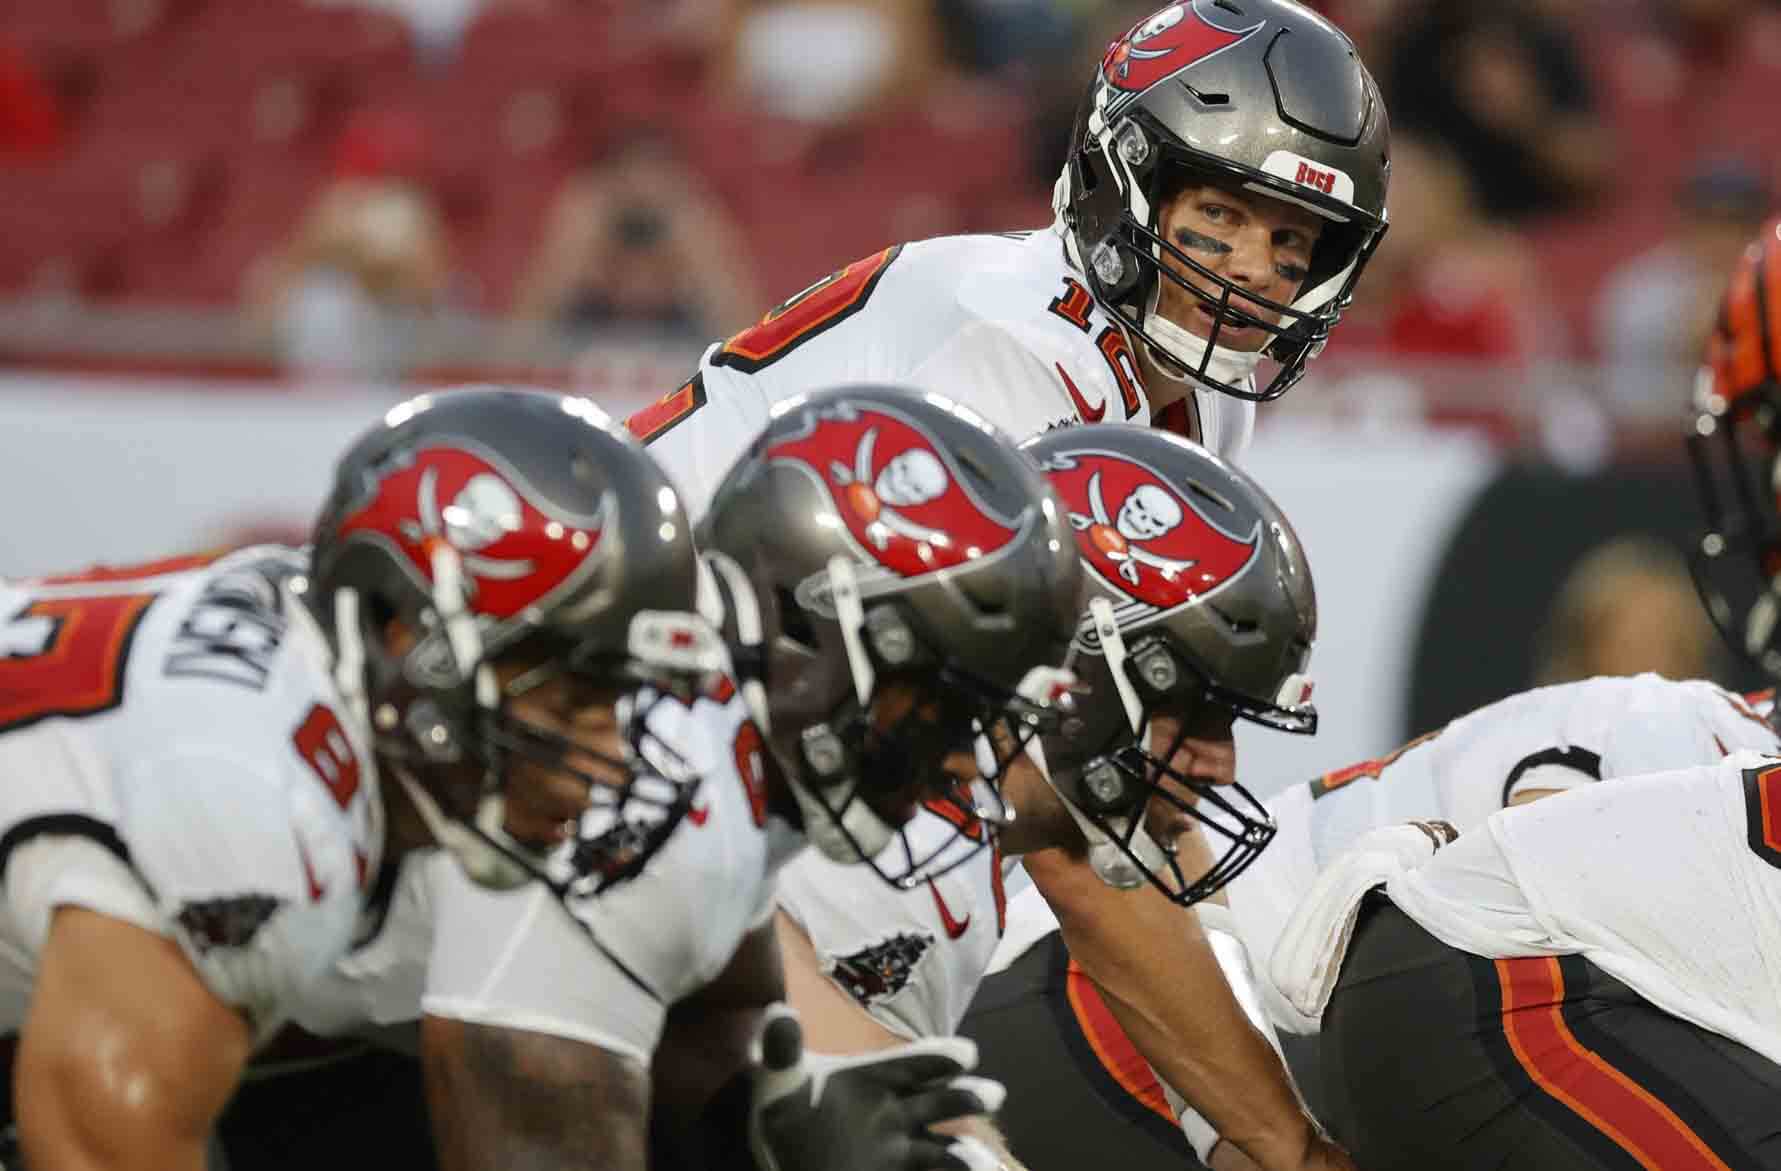 Tampa Bay Buccaneers quarterback Tom Brady (12) waits for the snap against the Cincinnati Bengals during the first quarter at Raymond James Stadium.